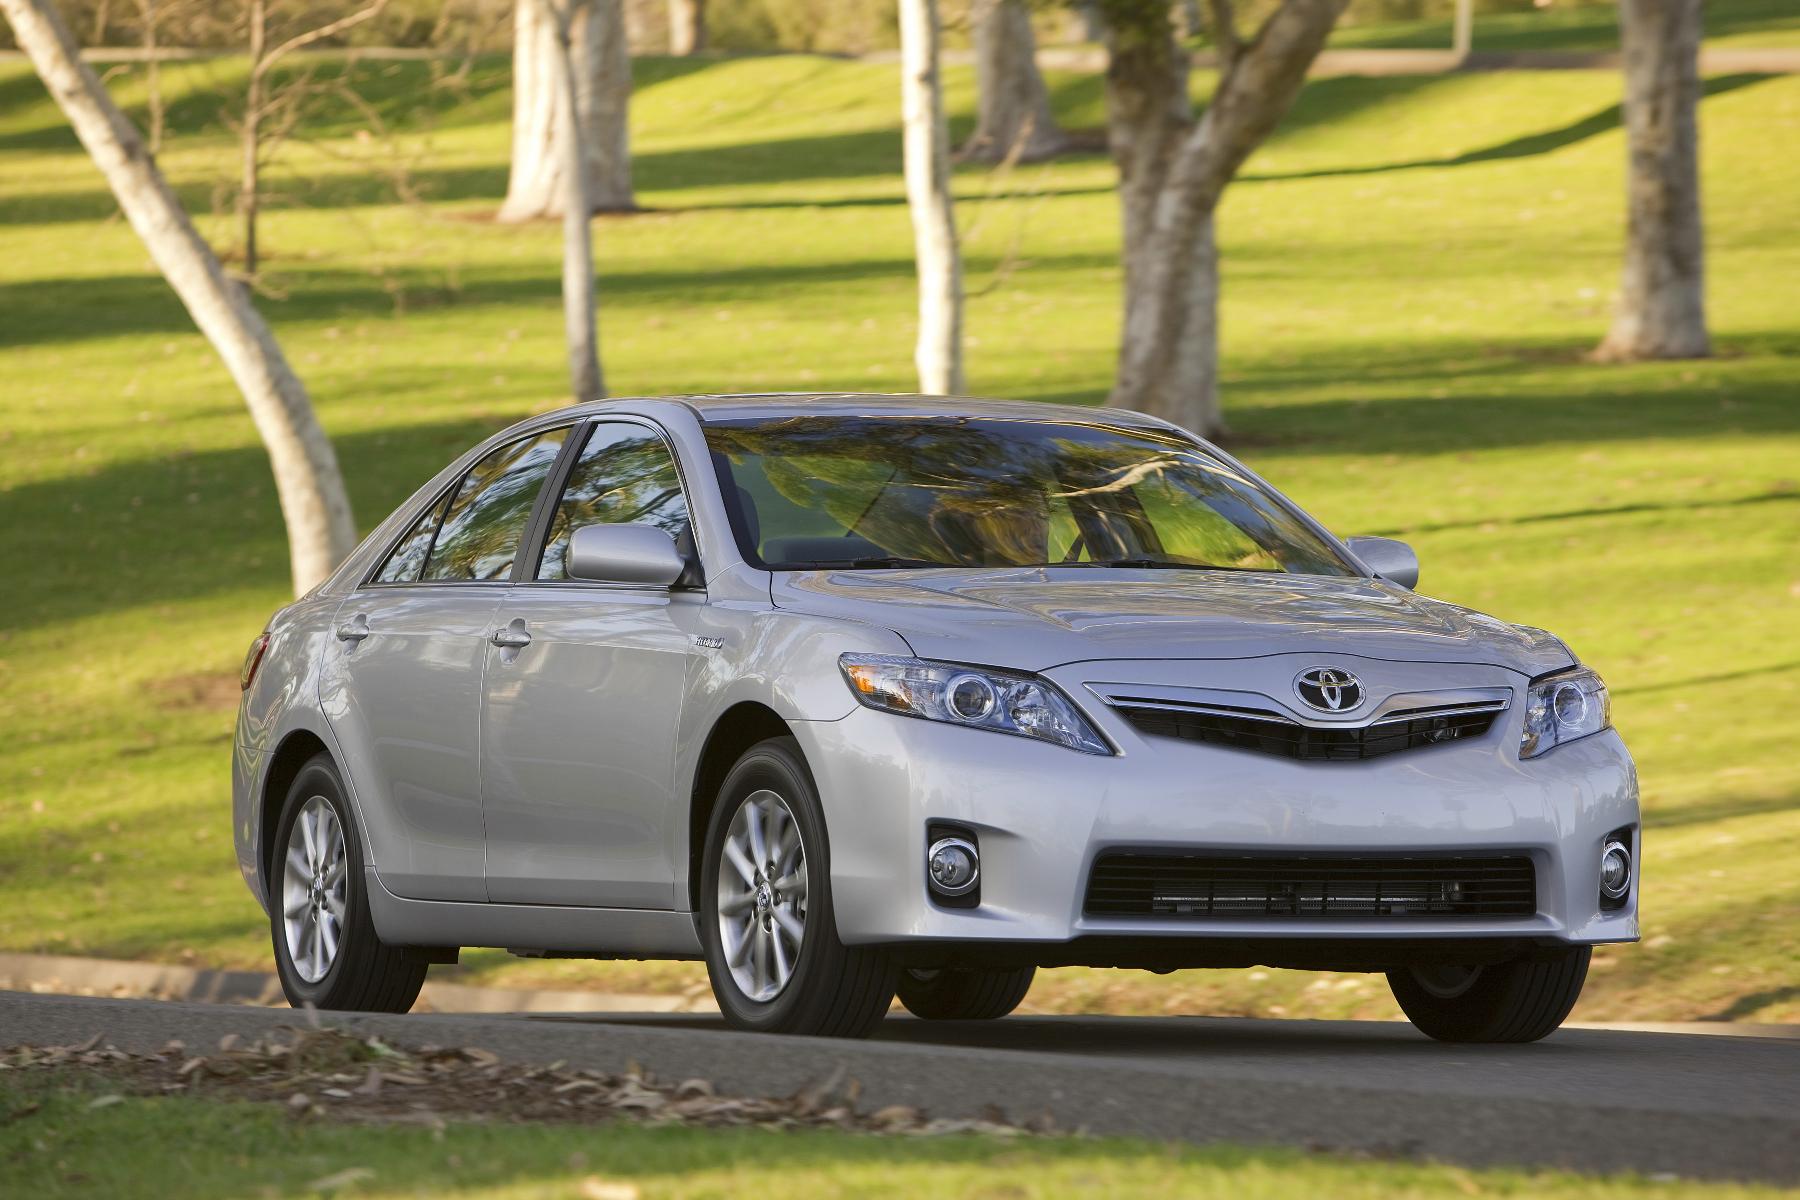 2010 Toyota Camry Hybrid: Nipped And Tucked